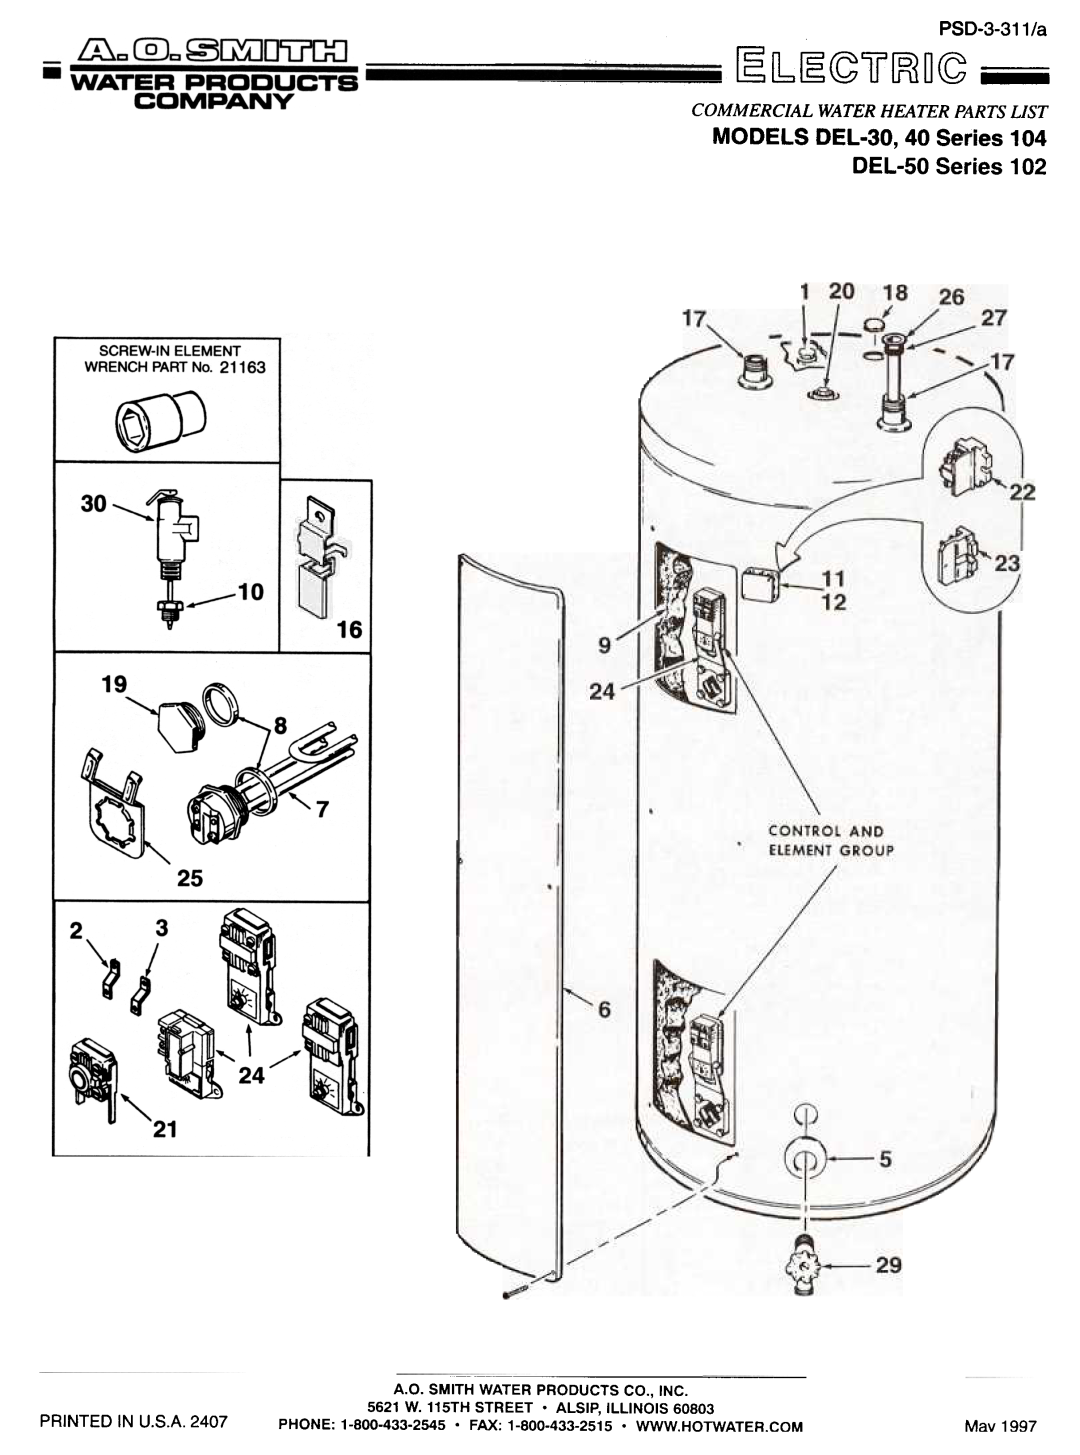 A.O. Smith DEL-30 Series 104 manual PSD-3-311/a, Commercialwaterheaterpartslist, Printed In U.S.A, ~~~cg¥fJOcg 